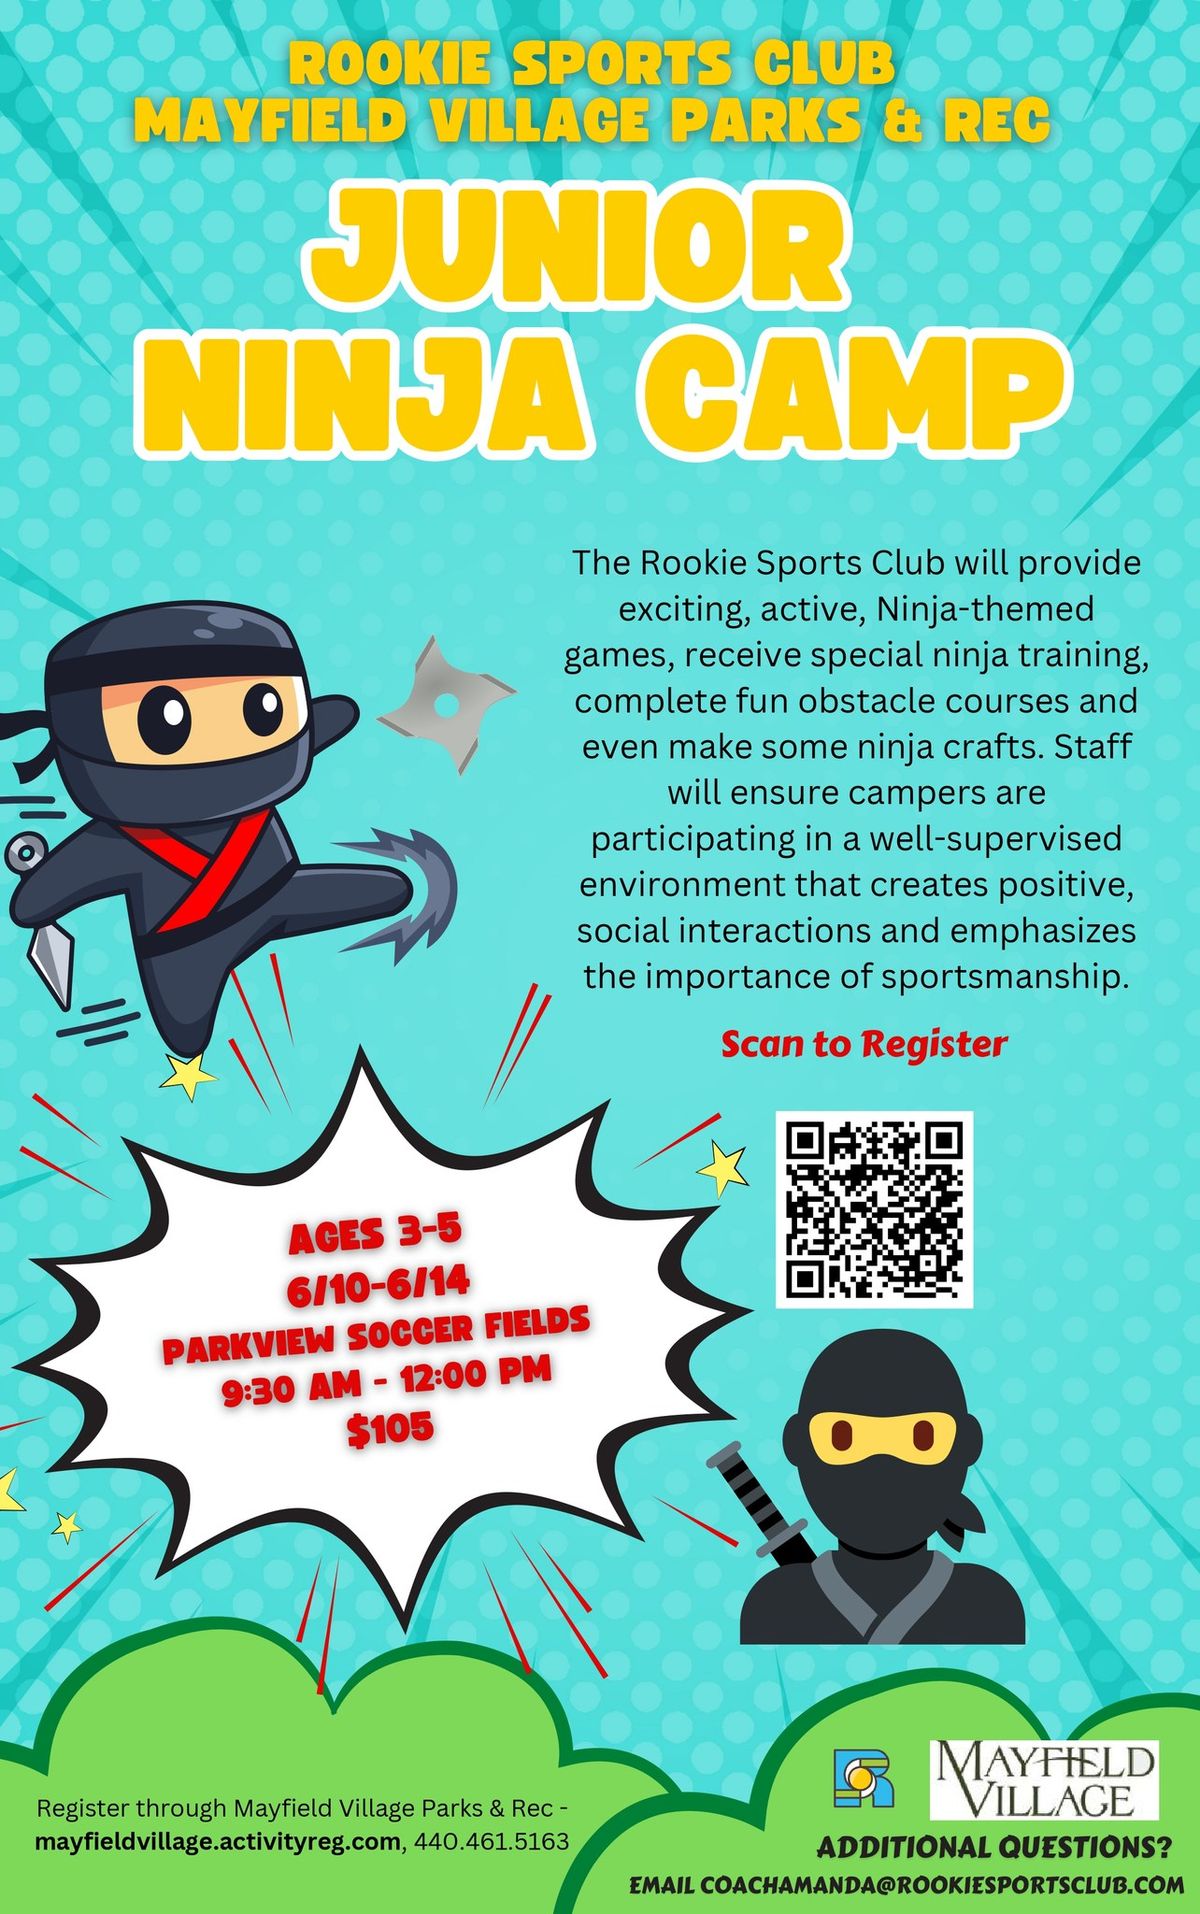 ROOKIE SPORTS CLUB SUMMER CAMPS - JUNIOR NINJA CAMP (Ages 3-5)